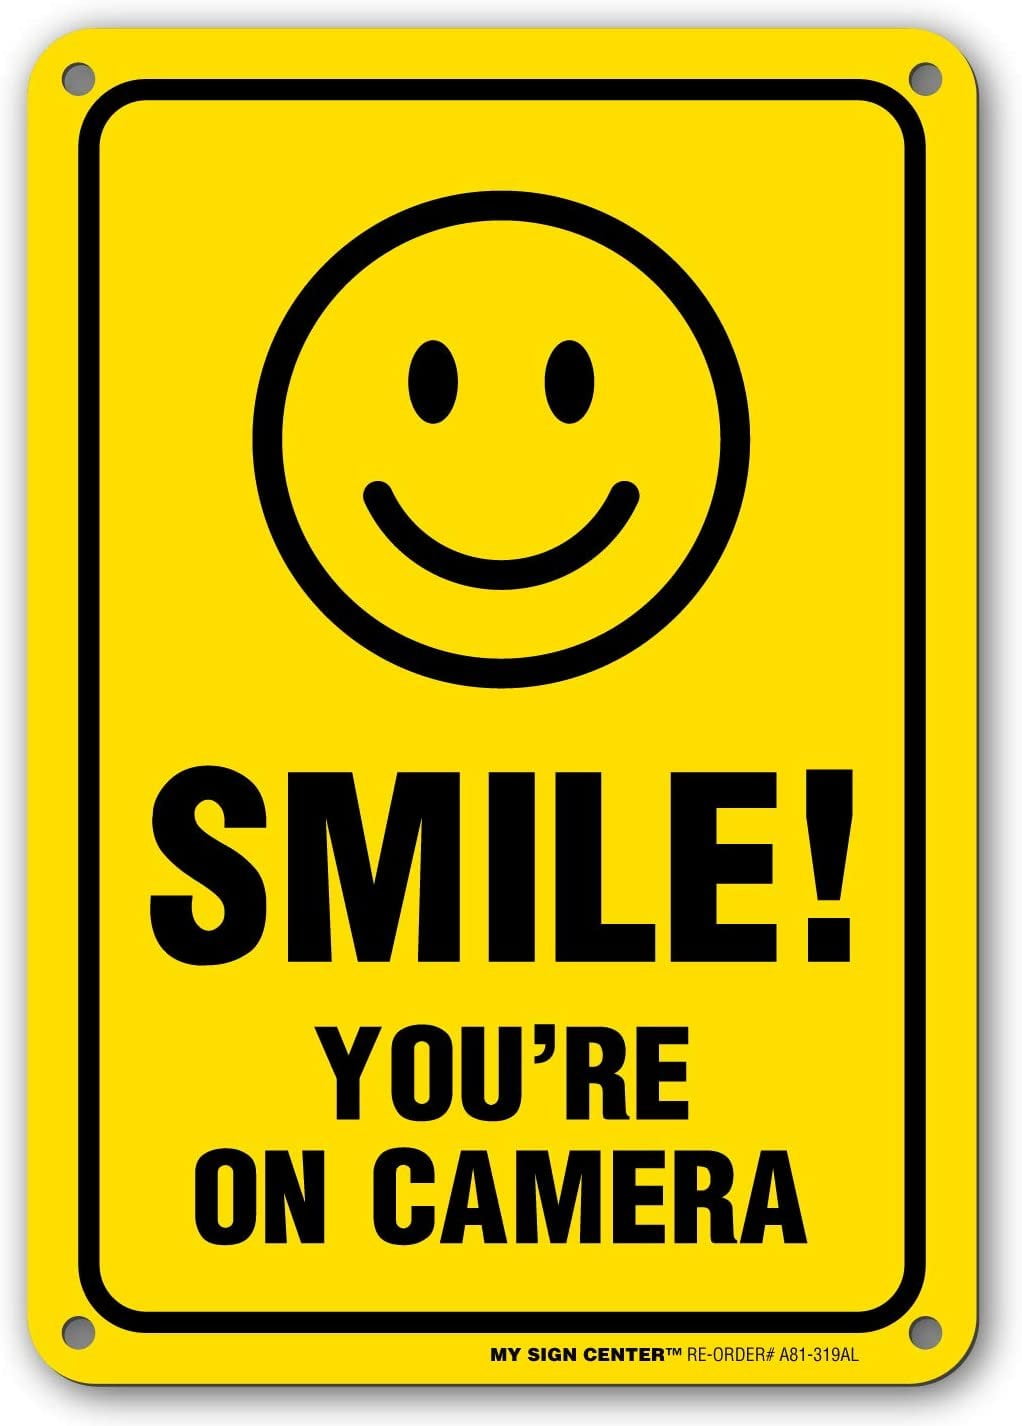 Smile your on CCTV Vinyl Decals x2 6x3 inches security deterrent 150mm x 75mm 